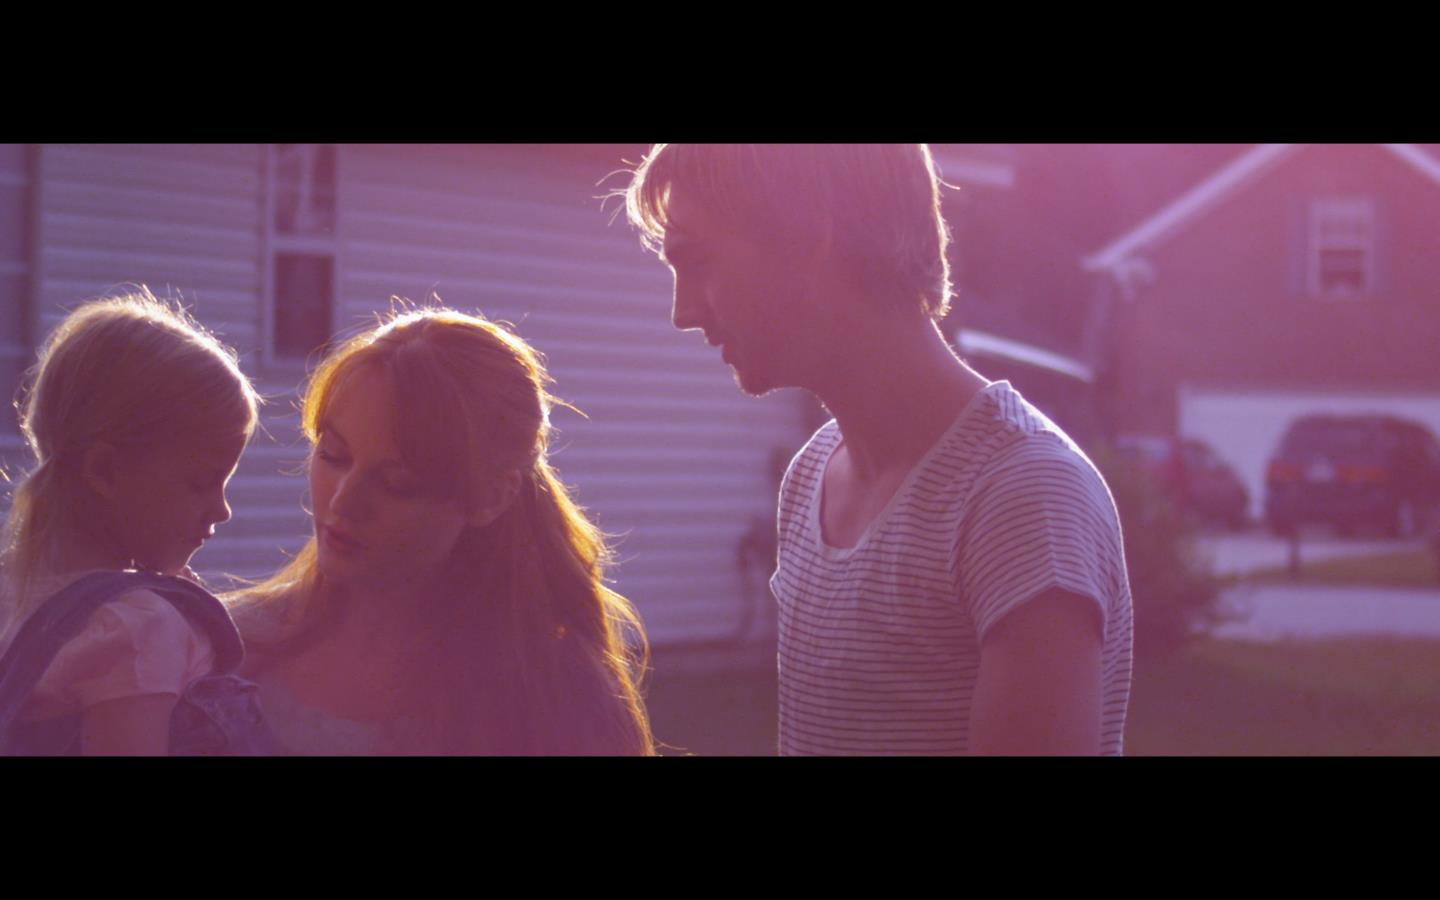 Production still from the short film Rearview with on-screen mom and dad, Courtland Jones and Travis Grant.